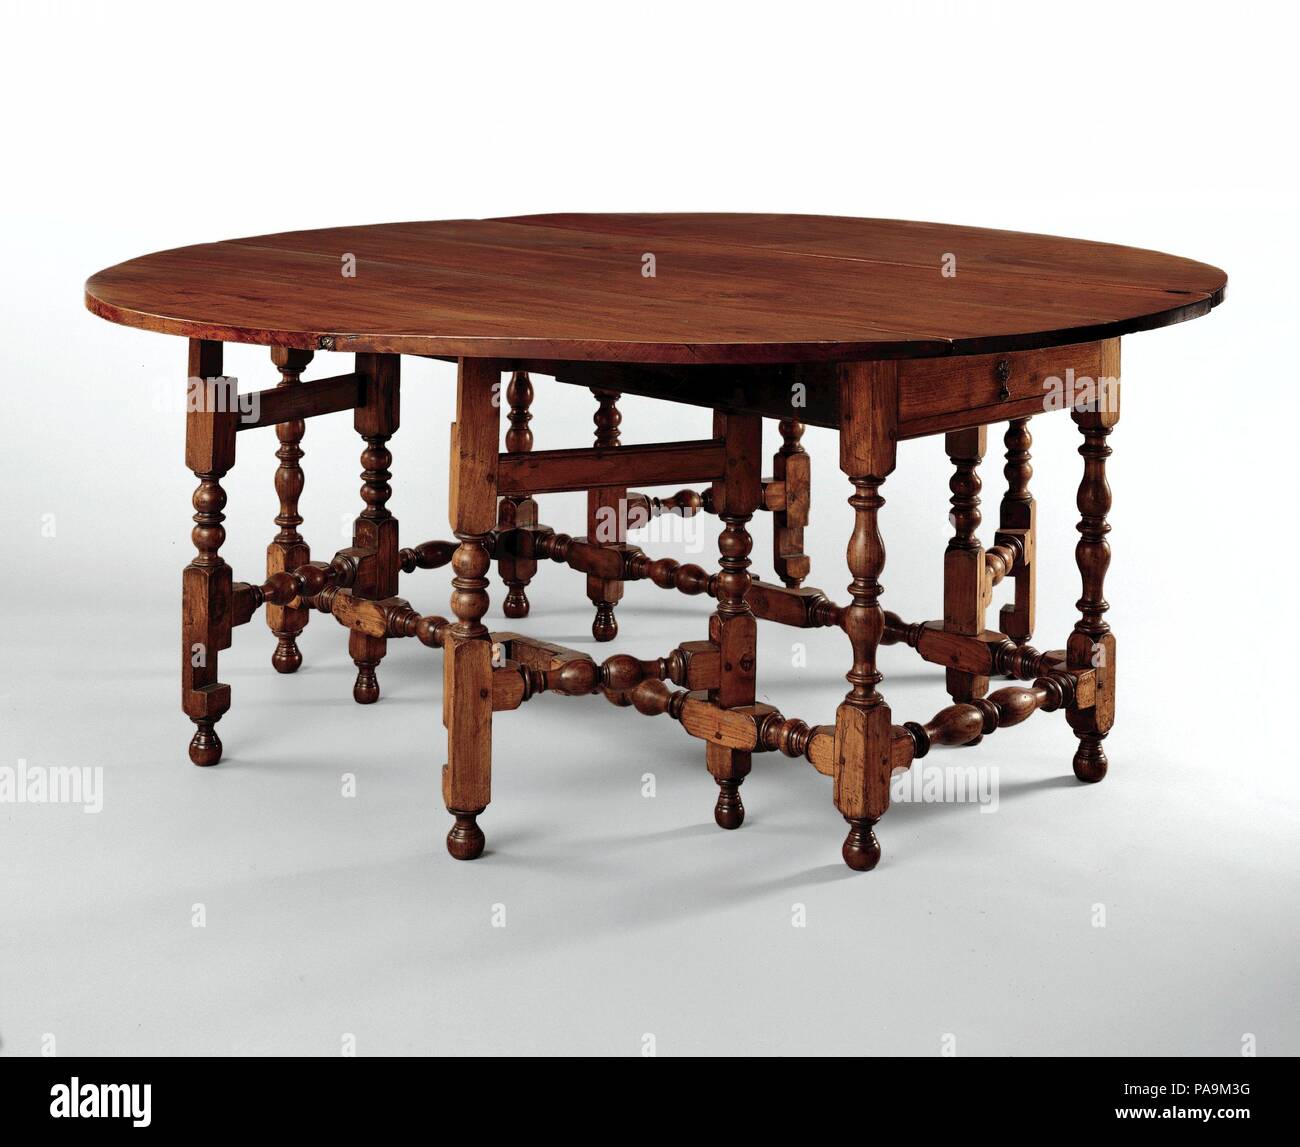 Oval table with falling leaves. Culture: American. Dimensions: 29 3/4 x 74 1/2 x 71 in. (75.6 x 189.2 x 180.3 cm). Date: 1690-1720.  This spectacular walnut table is as fine as any made in colonial America. Its multiple turned legs and gate-like supports create a virtual forest of baluster turnings. In stark contrast to the rectilinearity of seventeenth-century tables, the gentle elliptical curve of its top invited conviviality and conversation among those seated around it. The narrow width of leather and cane chairs of this period were ideal for use among the multiple legs on tables like thes Stock Photo